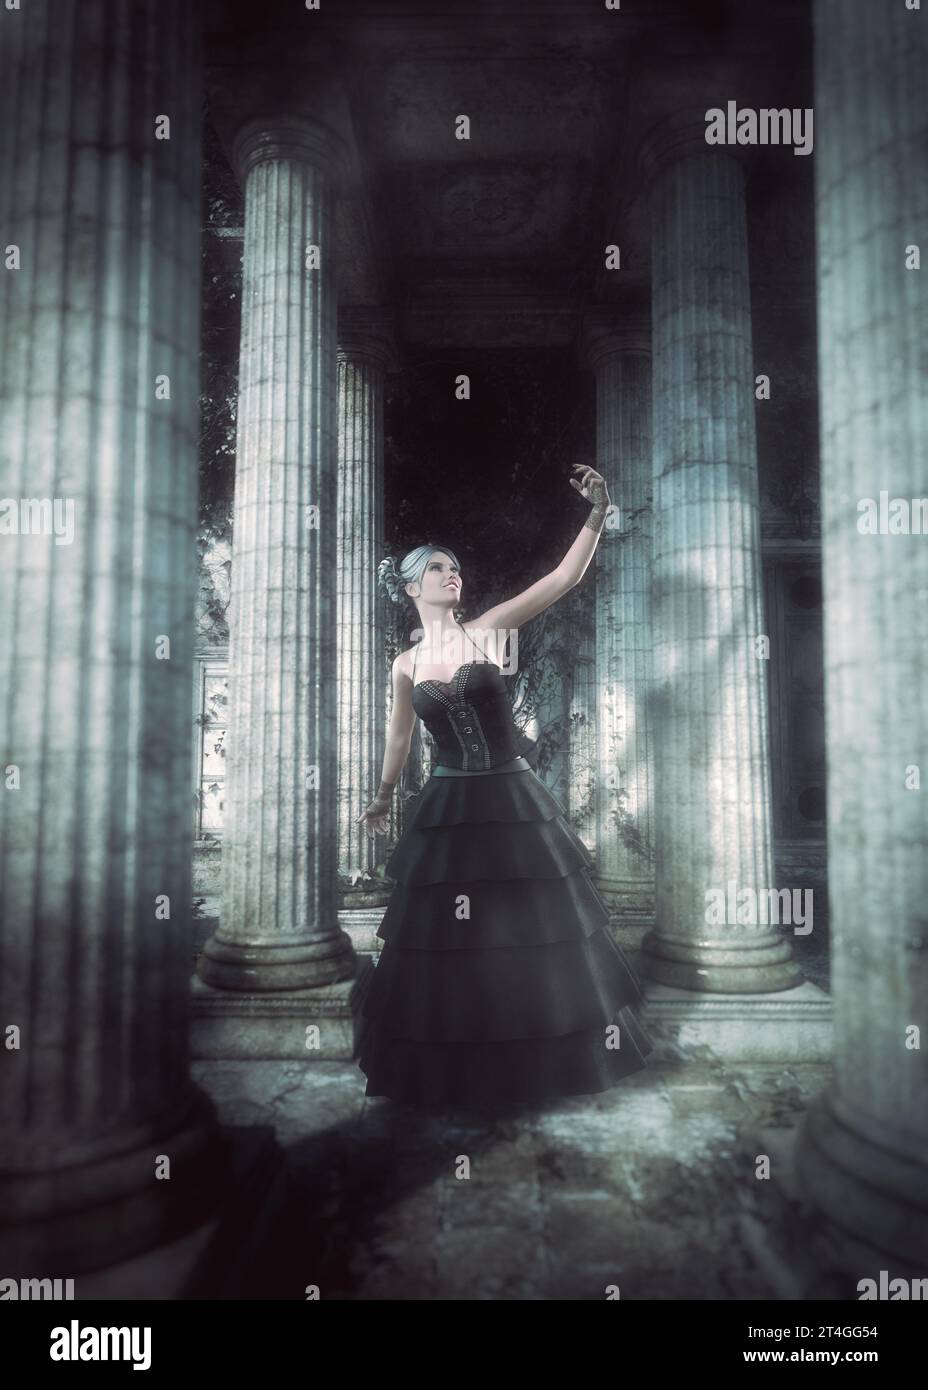 Woman in black gothic outfit and ancient building at night. 3D Illustration. Stock Photo